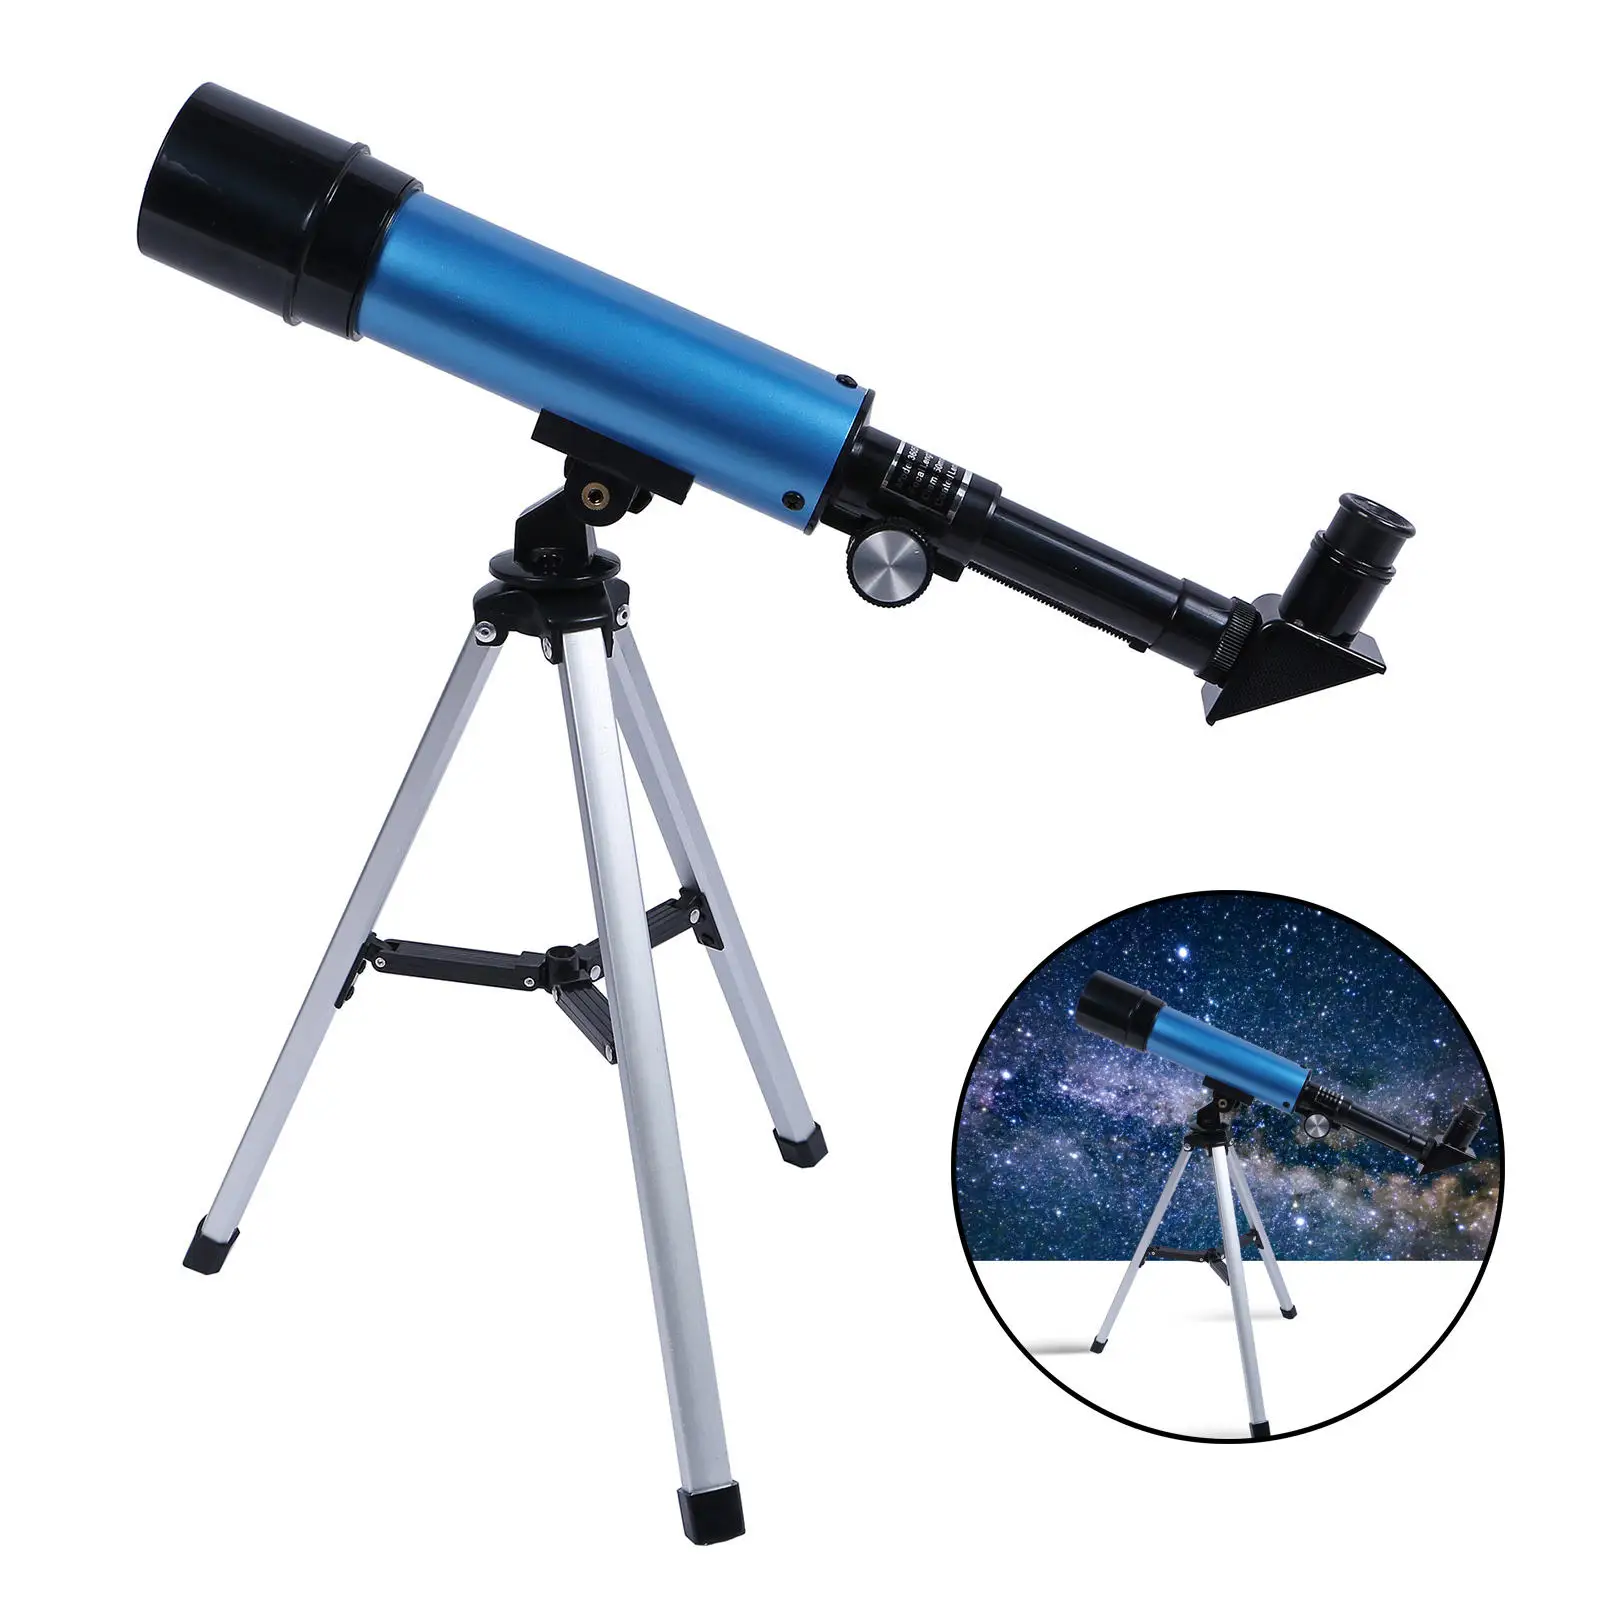 

Lunar Telescope for Kids, 90x Magnification, Includes Two Eyepieces, Tabletop Tripod Gift for a Young Astronomer Kids Beginners